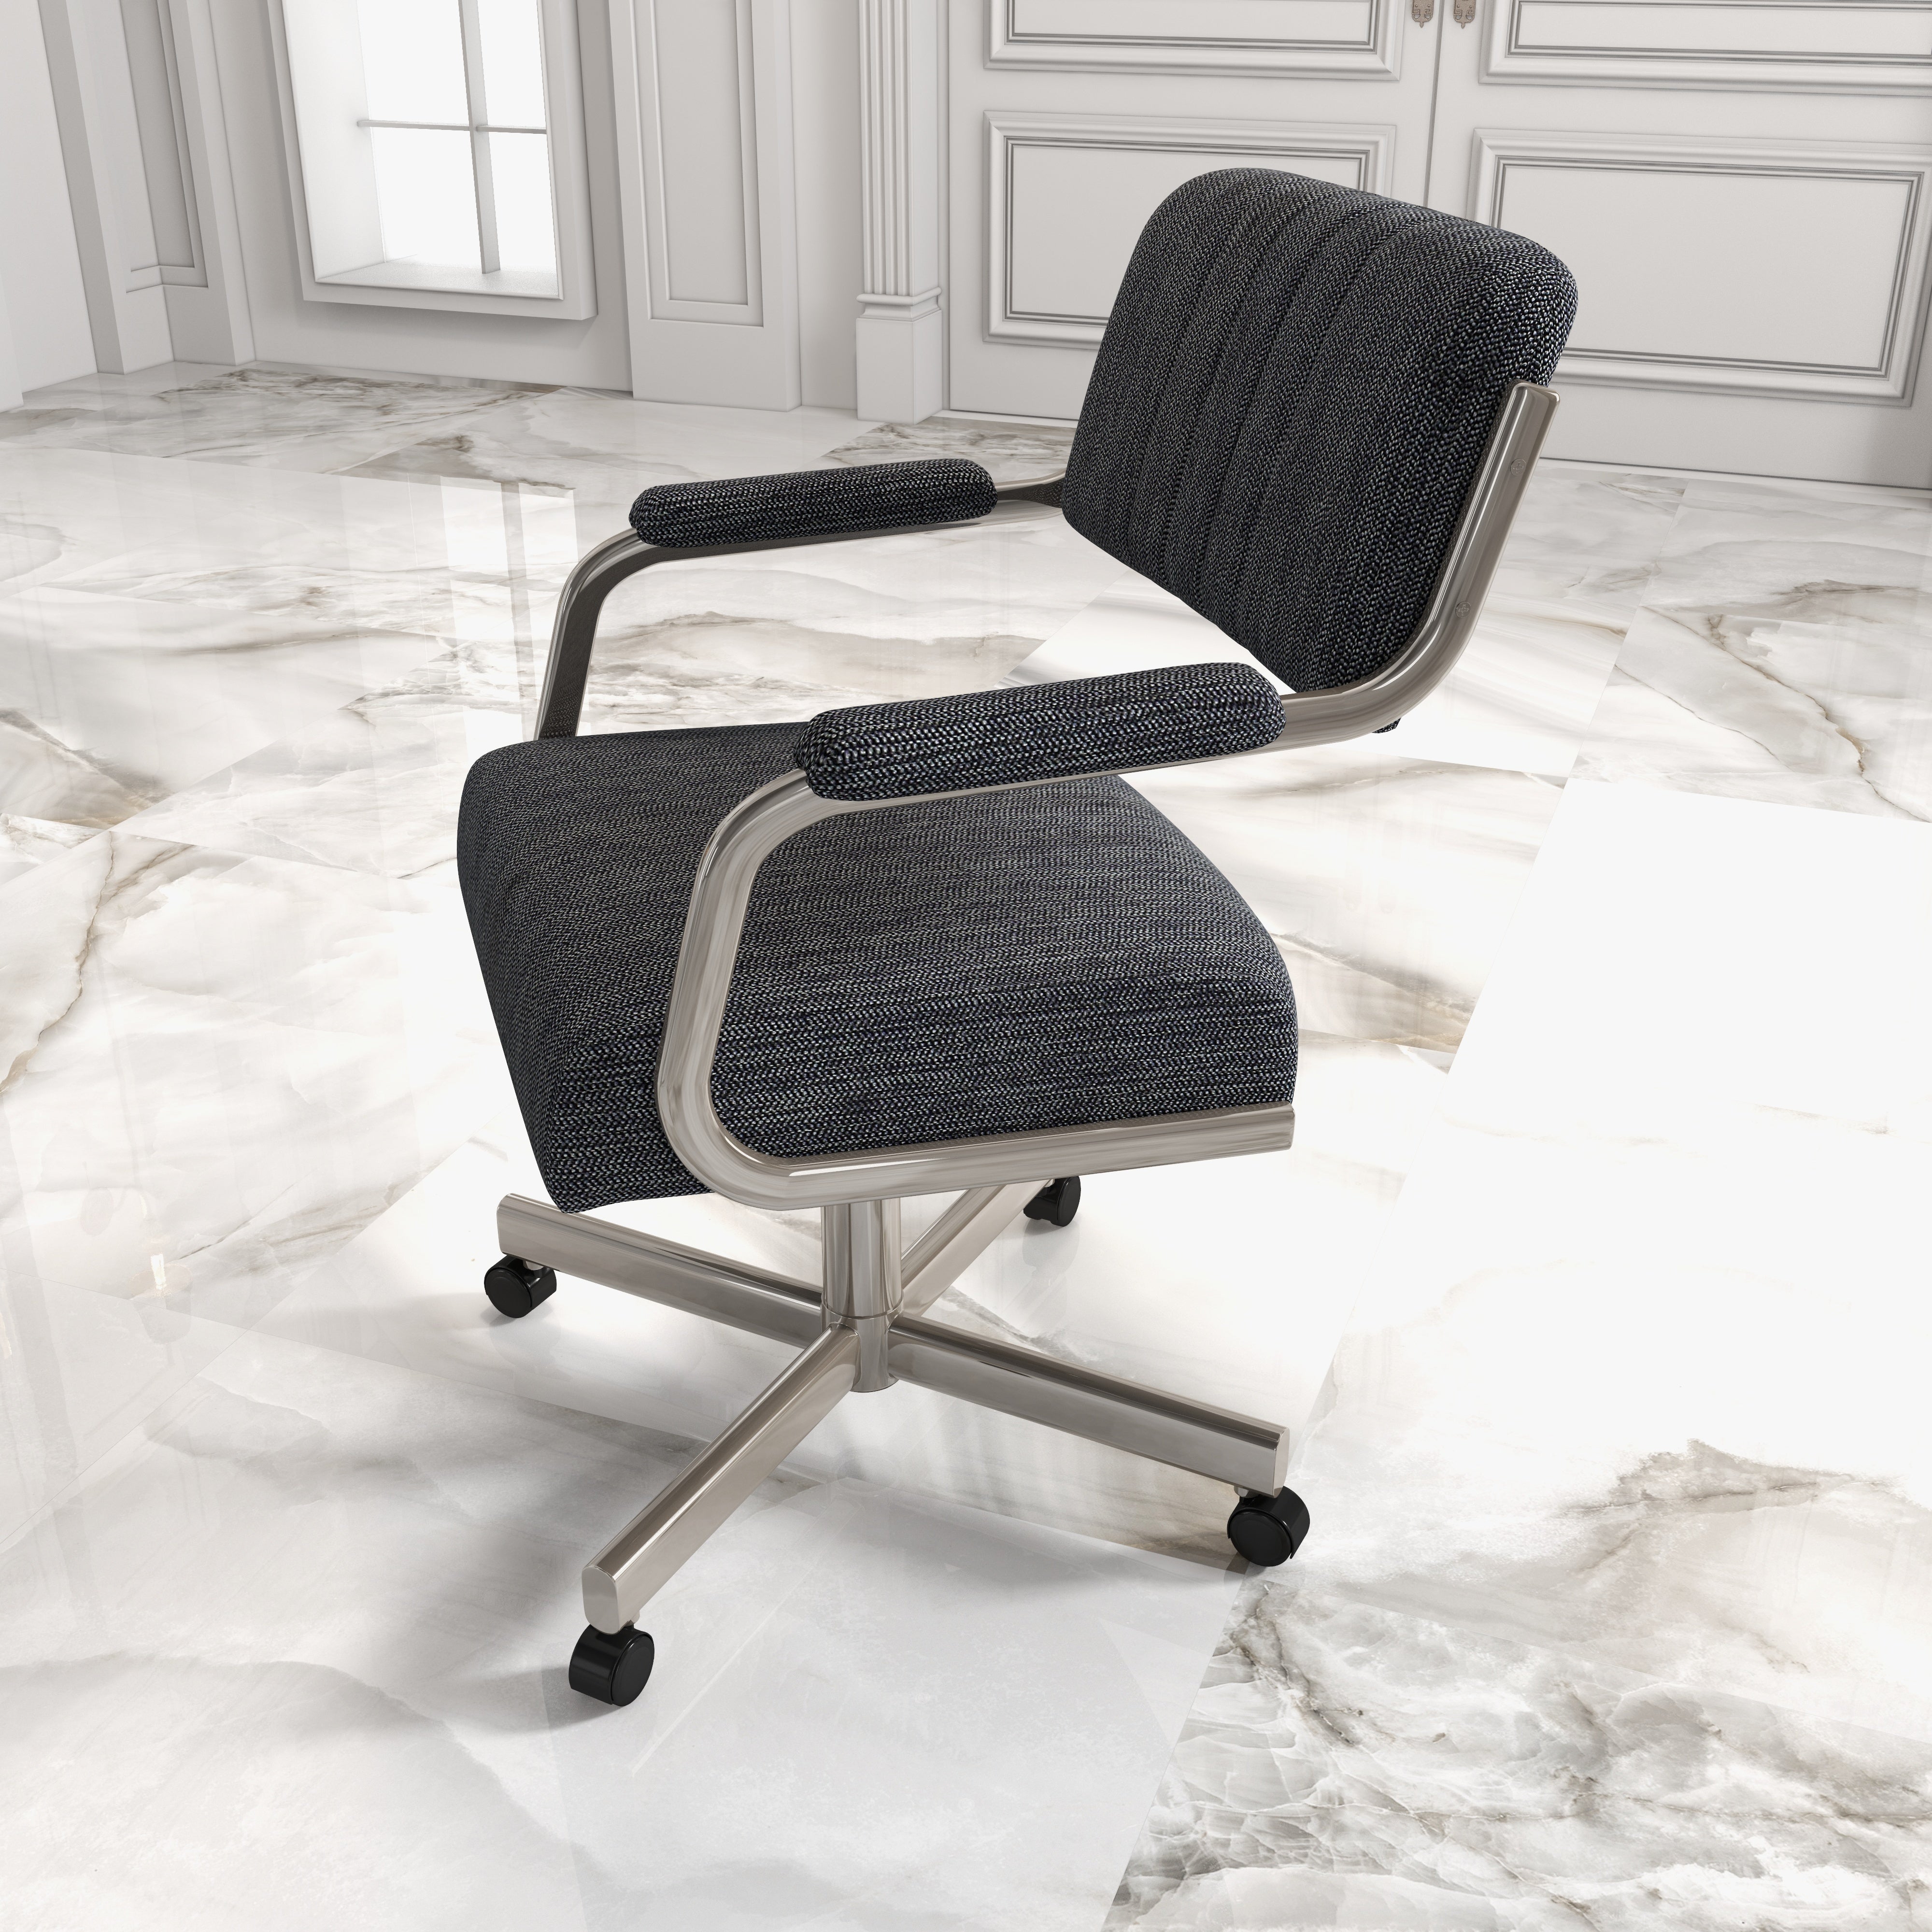 Clio Collection KM96-KP01 Channel Upholstered Back Between Exposed Metal Arms With Padded Upholstered Caps Over An All-Metal Swivel Tilt: Opulence Meet Versatility